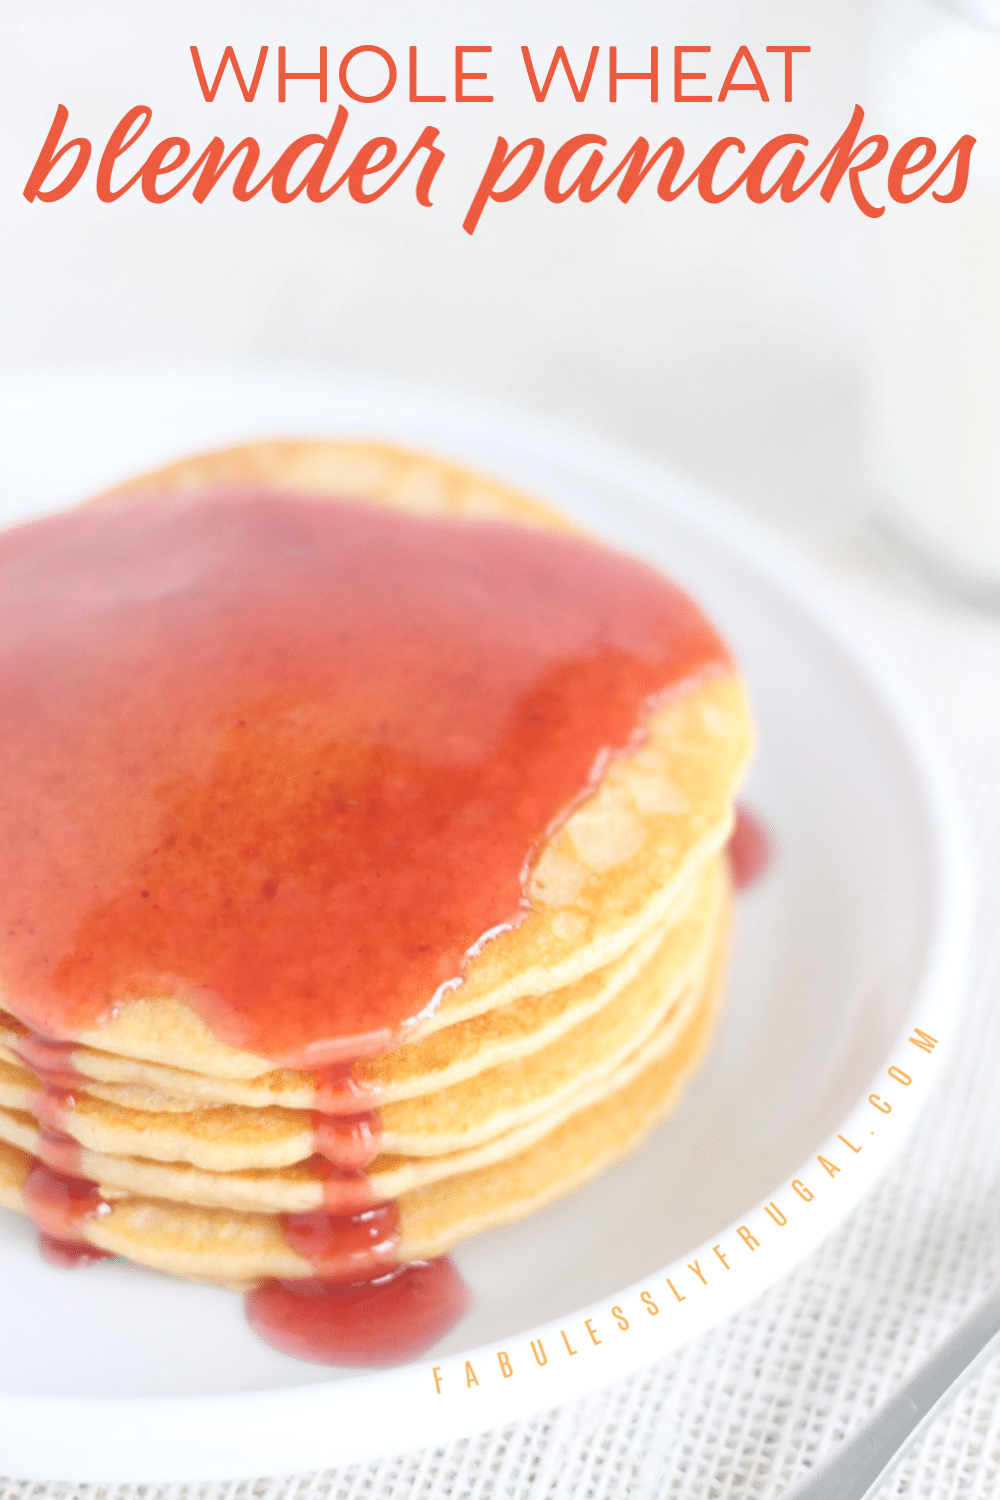 Blender pancakes with syrup